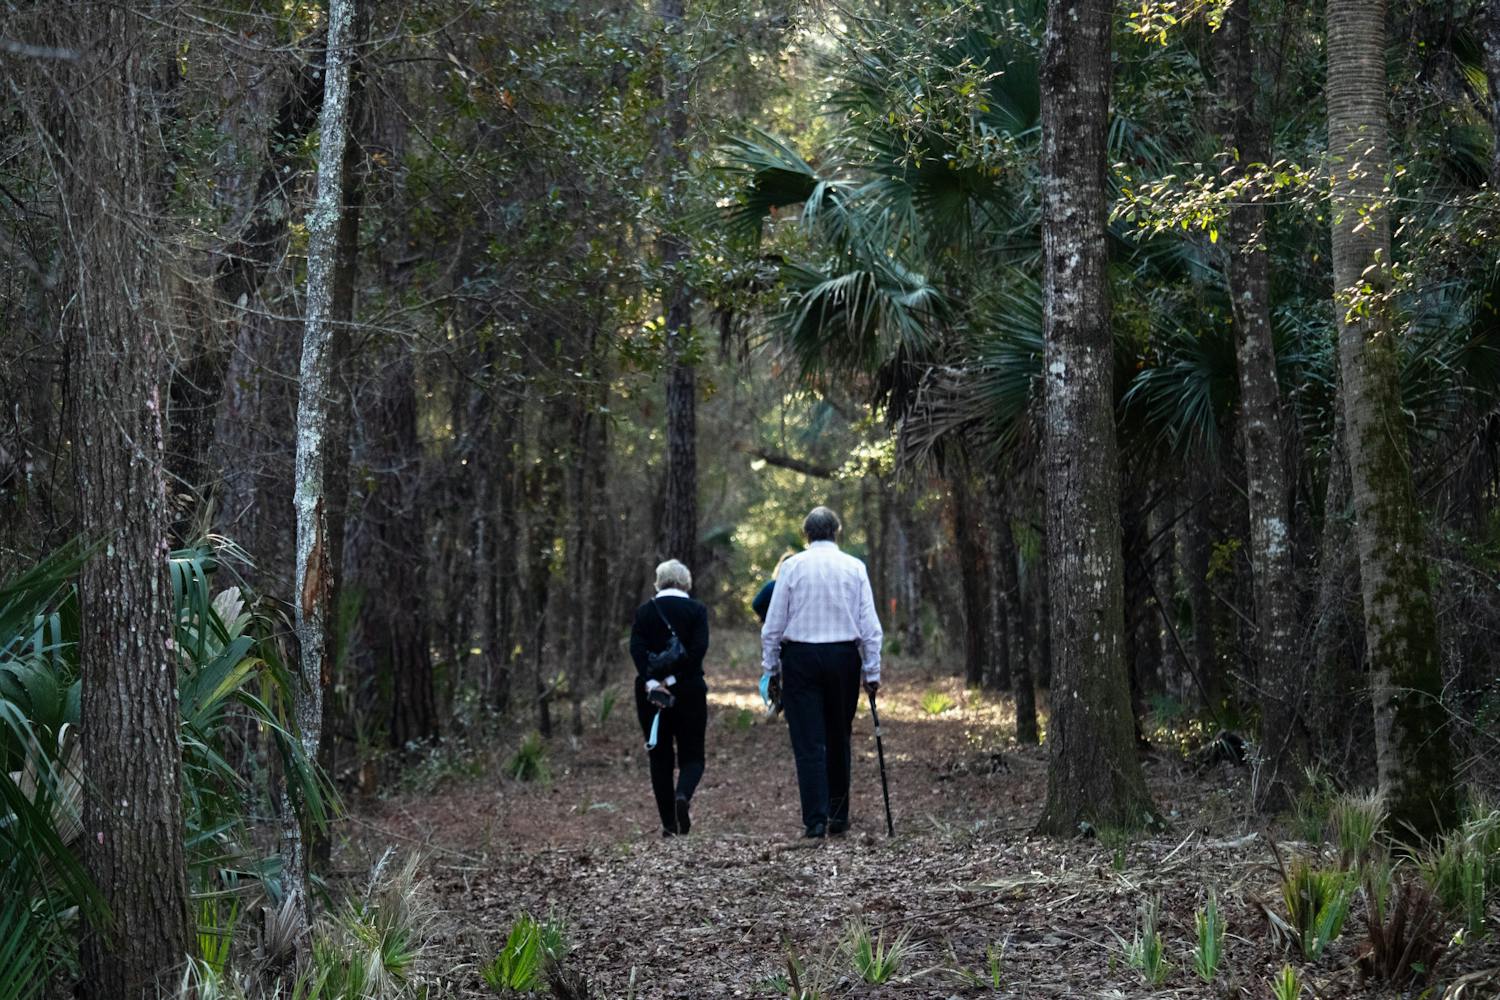 Attendees of the wreath laying ceremony walk through the 5-acre Rosewood property after the ceremony concludes Sunday, Jan. 8, 2023.